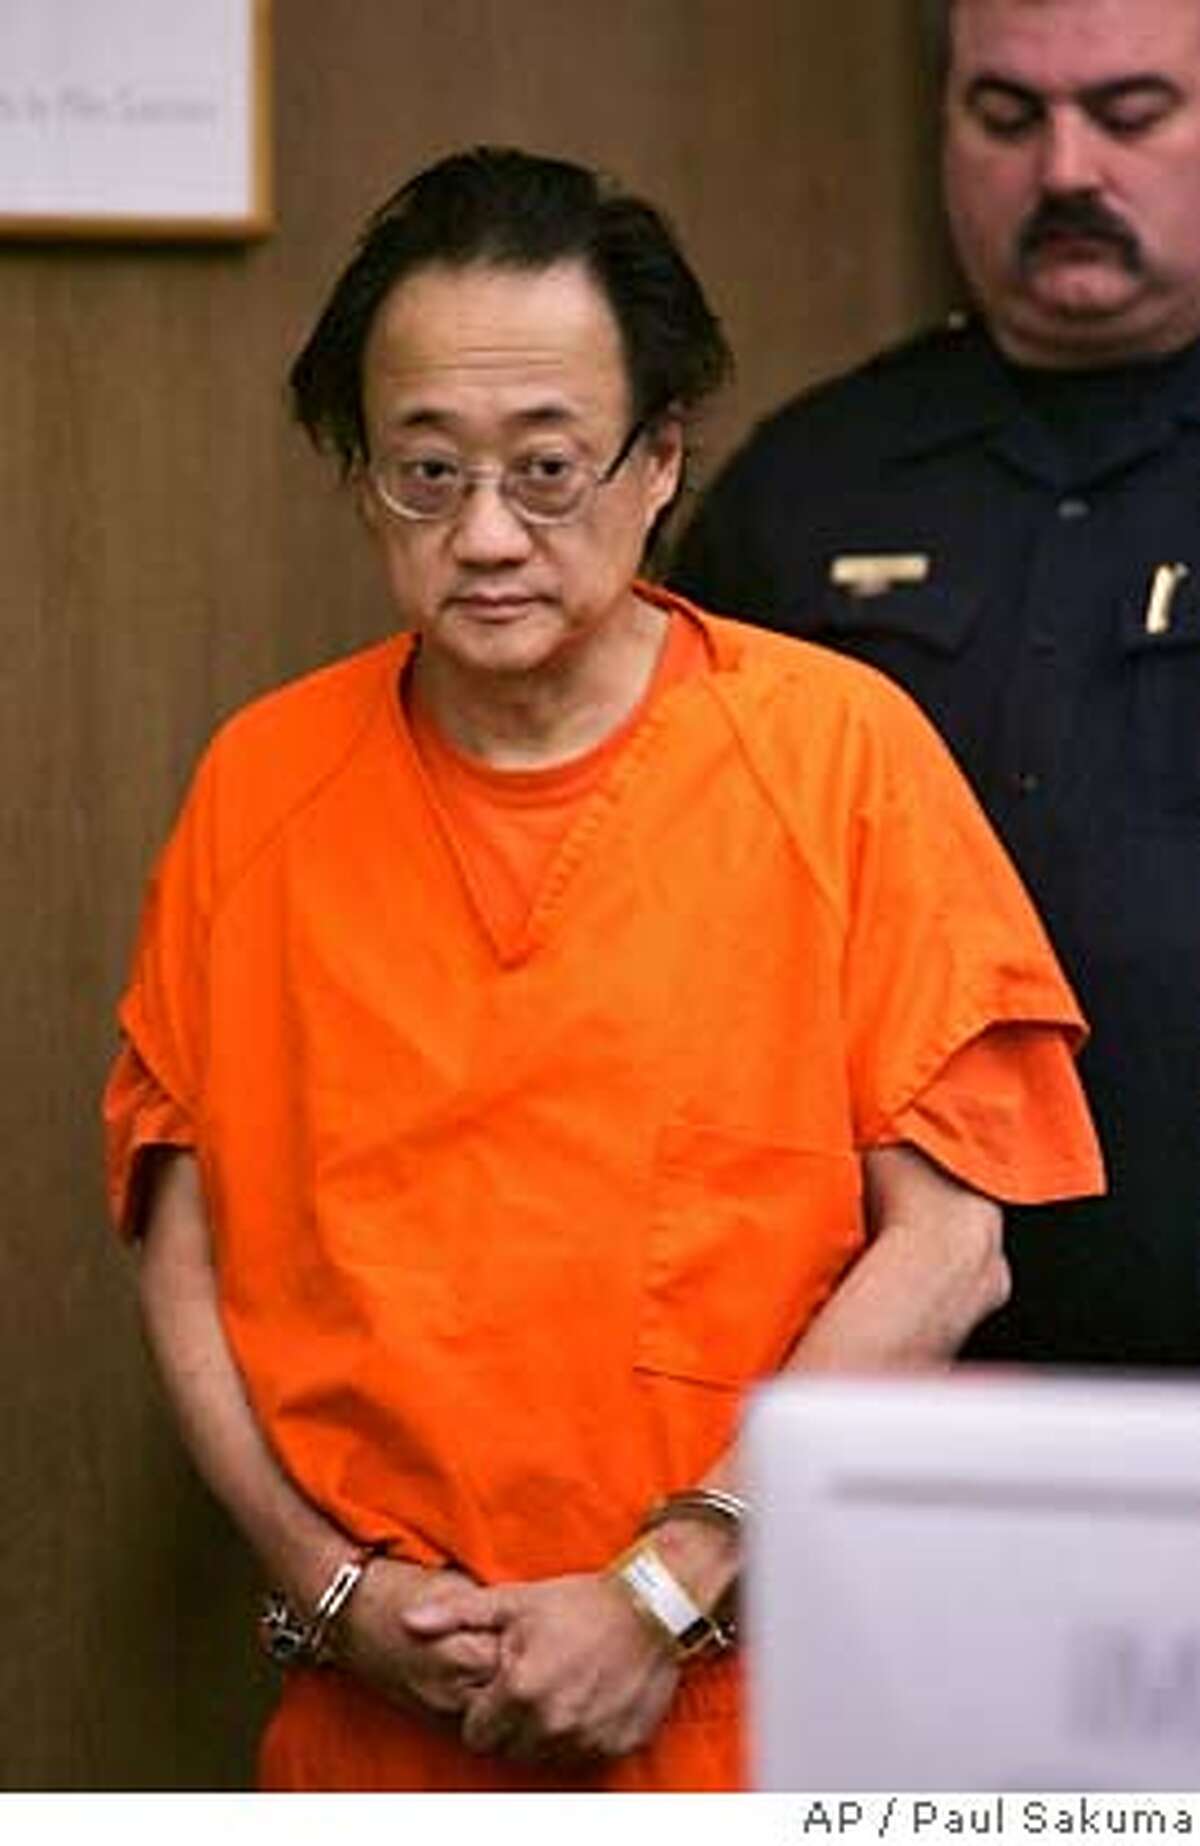 Norman Hsu is escorted into a Redwood City, Calif., courtroom, Friday, Sept. 21, 2007. Jilted investors who sunk $63 million into Hsu's alleged Ponzi schemes are competing for whatever financial crumbs they can shake from the disgraced Democratic fundraiser. At the same time, state and federal prosecutors are wrangling over where he should be jailed. (AP Photo/Paul Sakuma, pool) POOL PHOTO